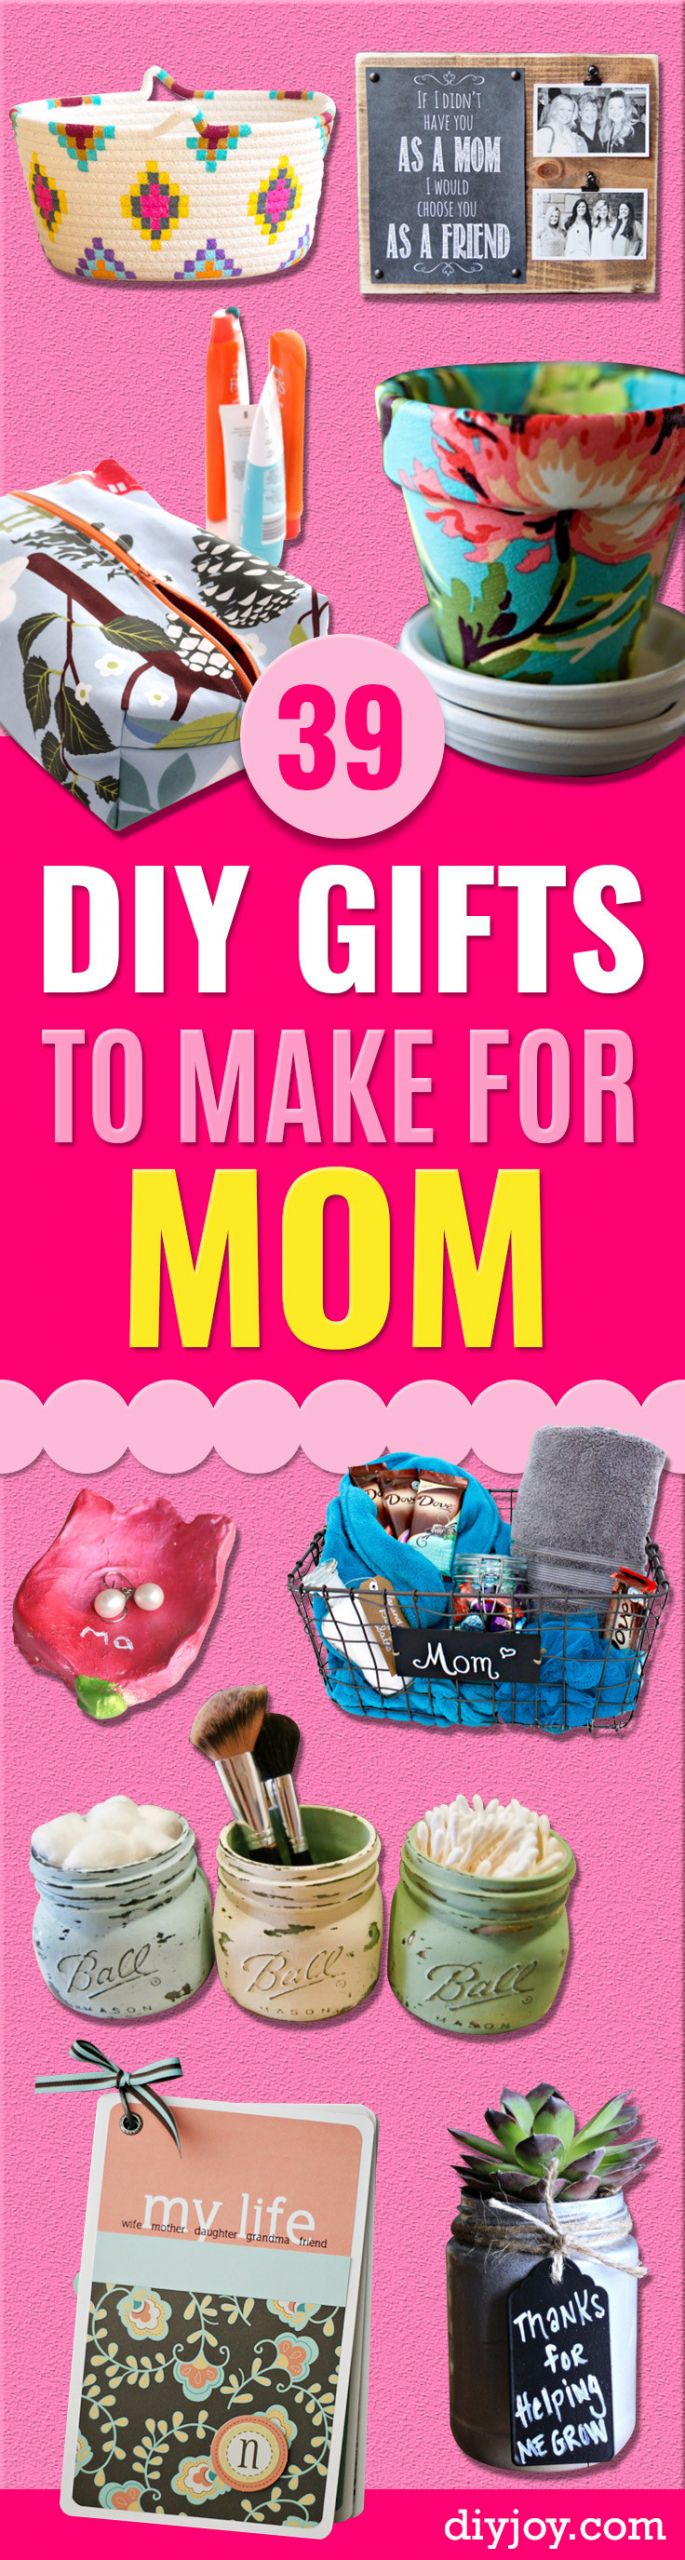 Birthday Gift Ideas For Mothers
 39 Creative DIY Gifts to Make for Mom